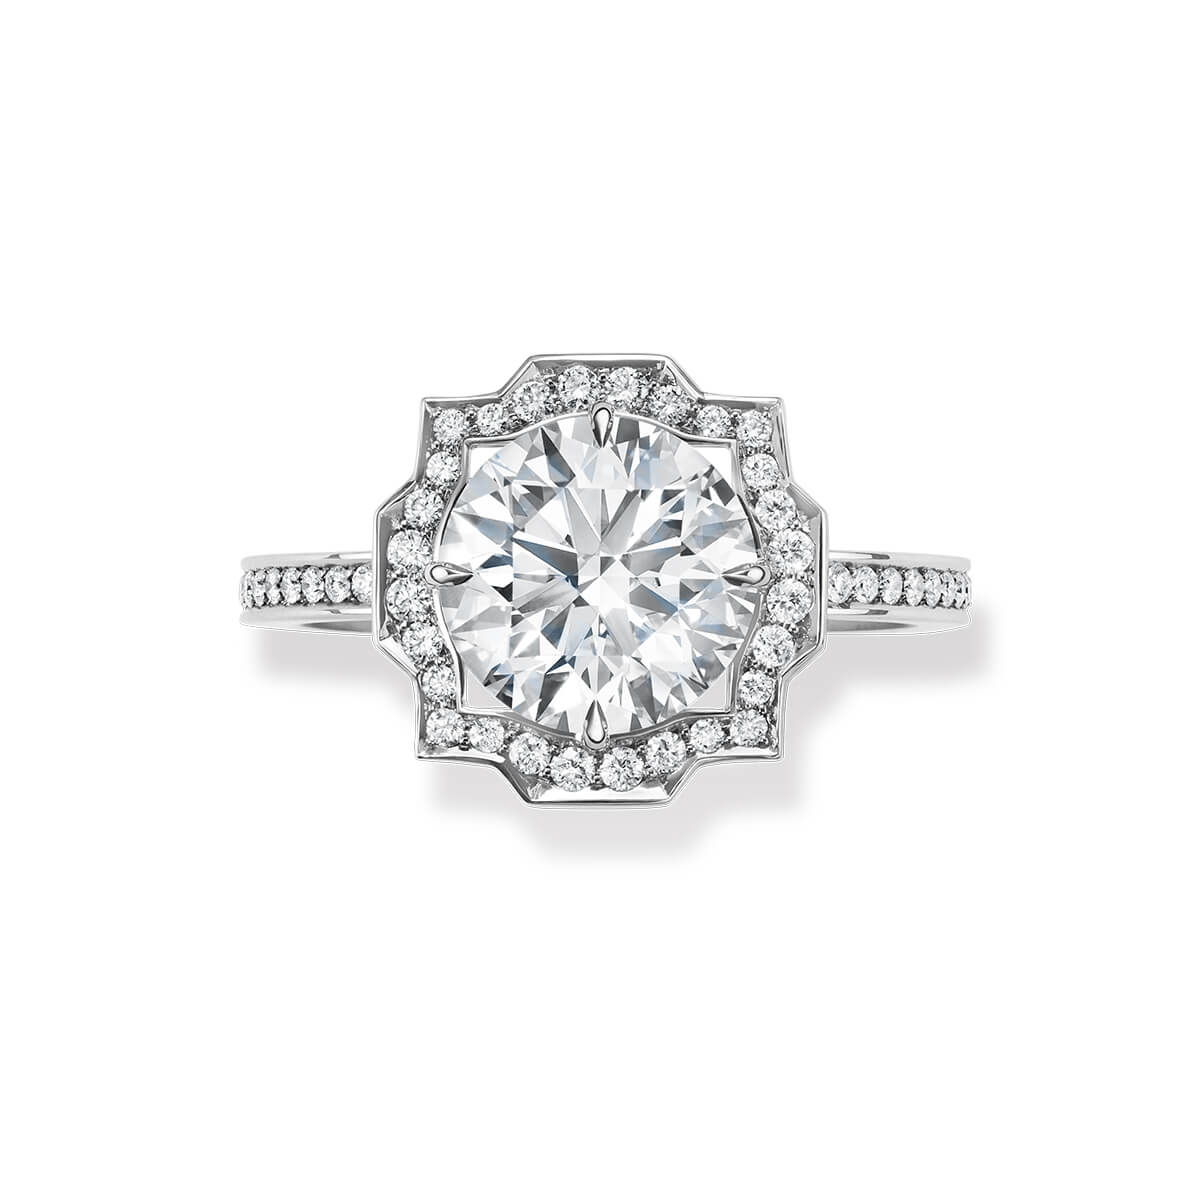 Belle by Harry Winston diamond and platinum engagement ring